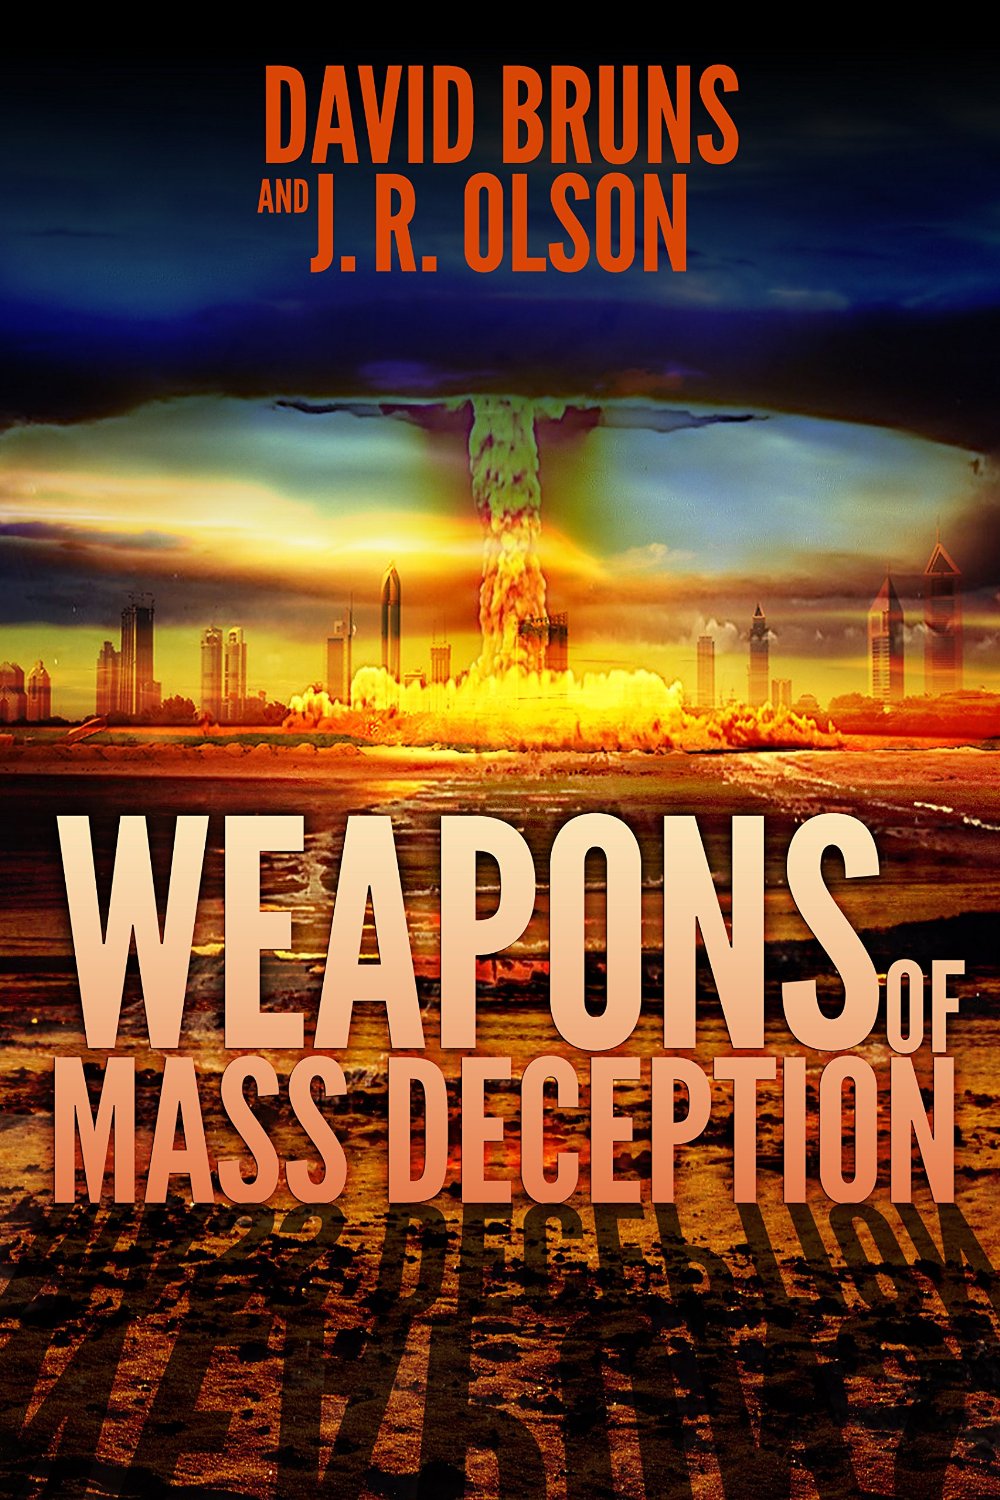 Weapons Of Mass Deception